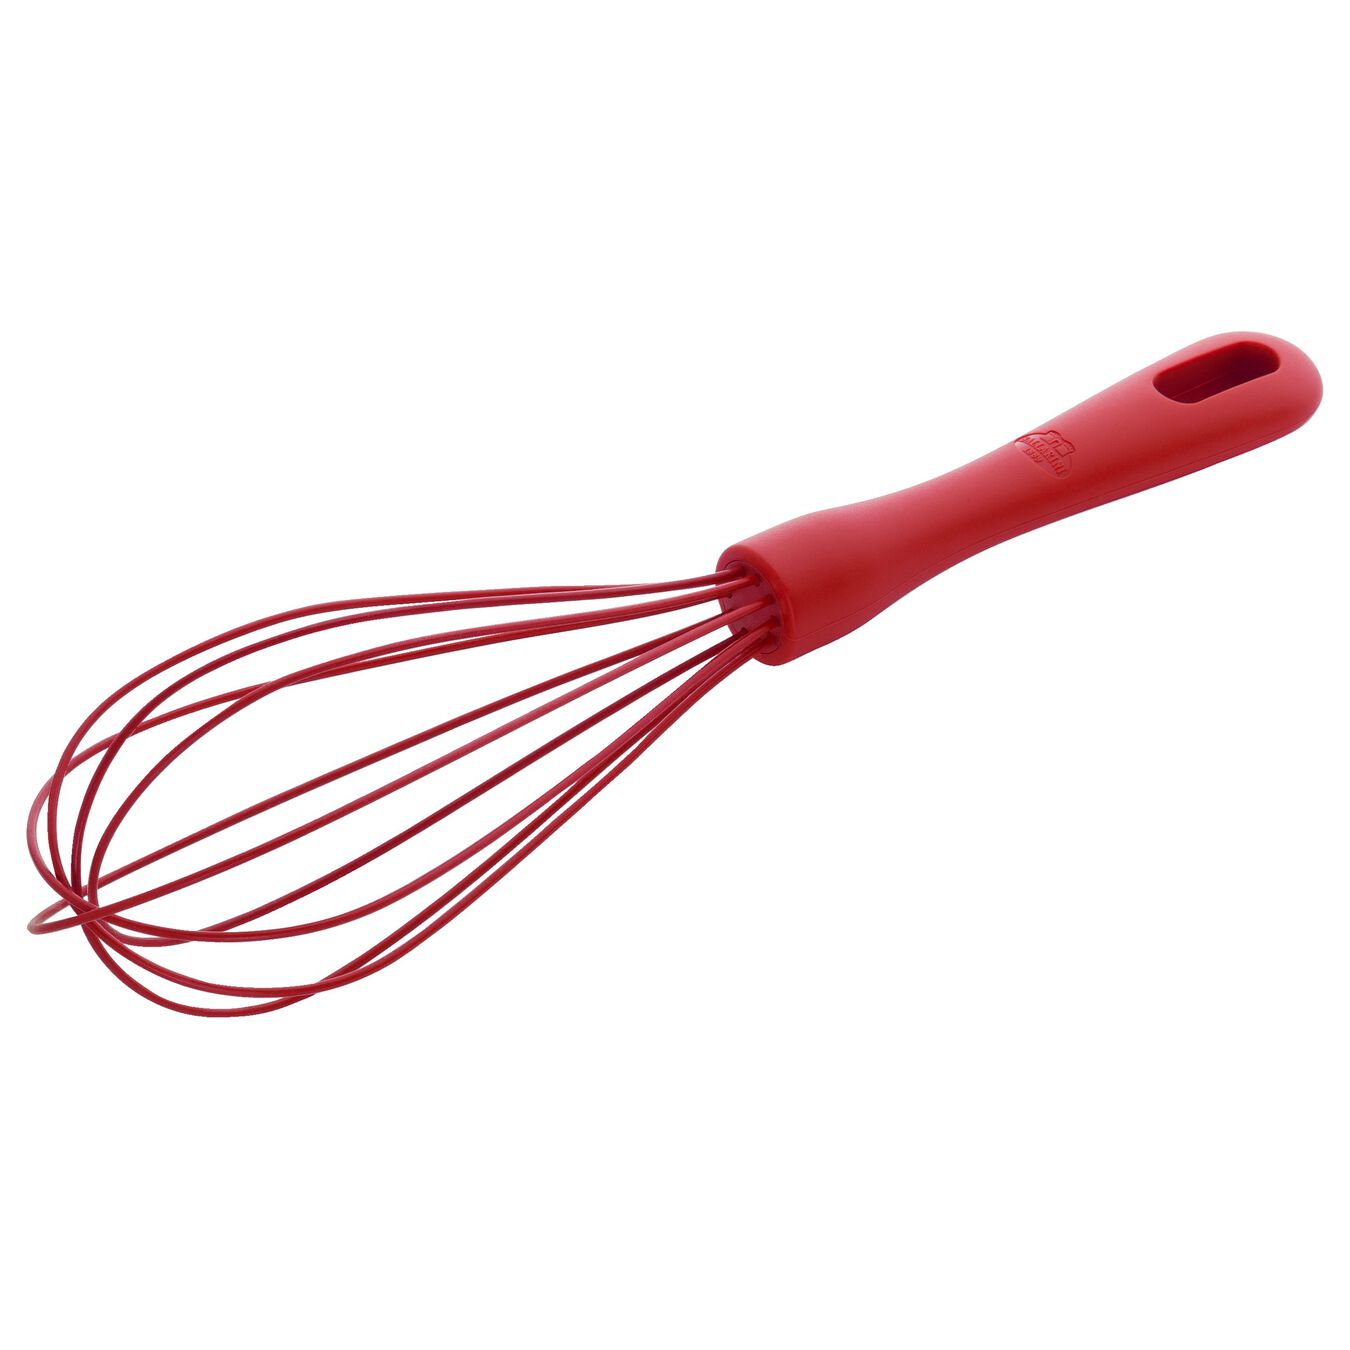 Whisk, 29 cm, silicone,,large 1